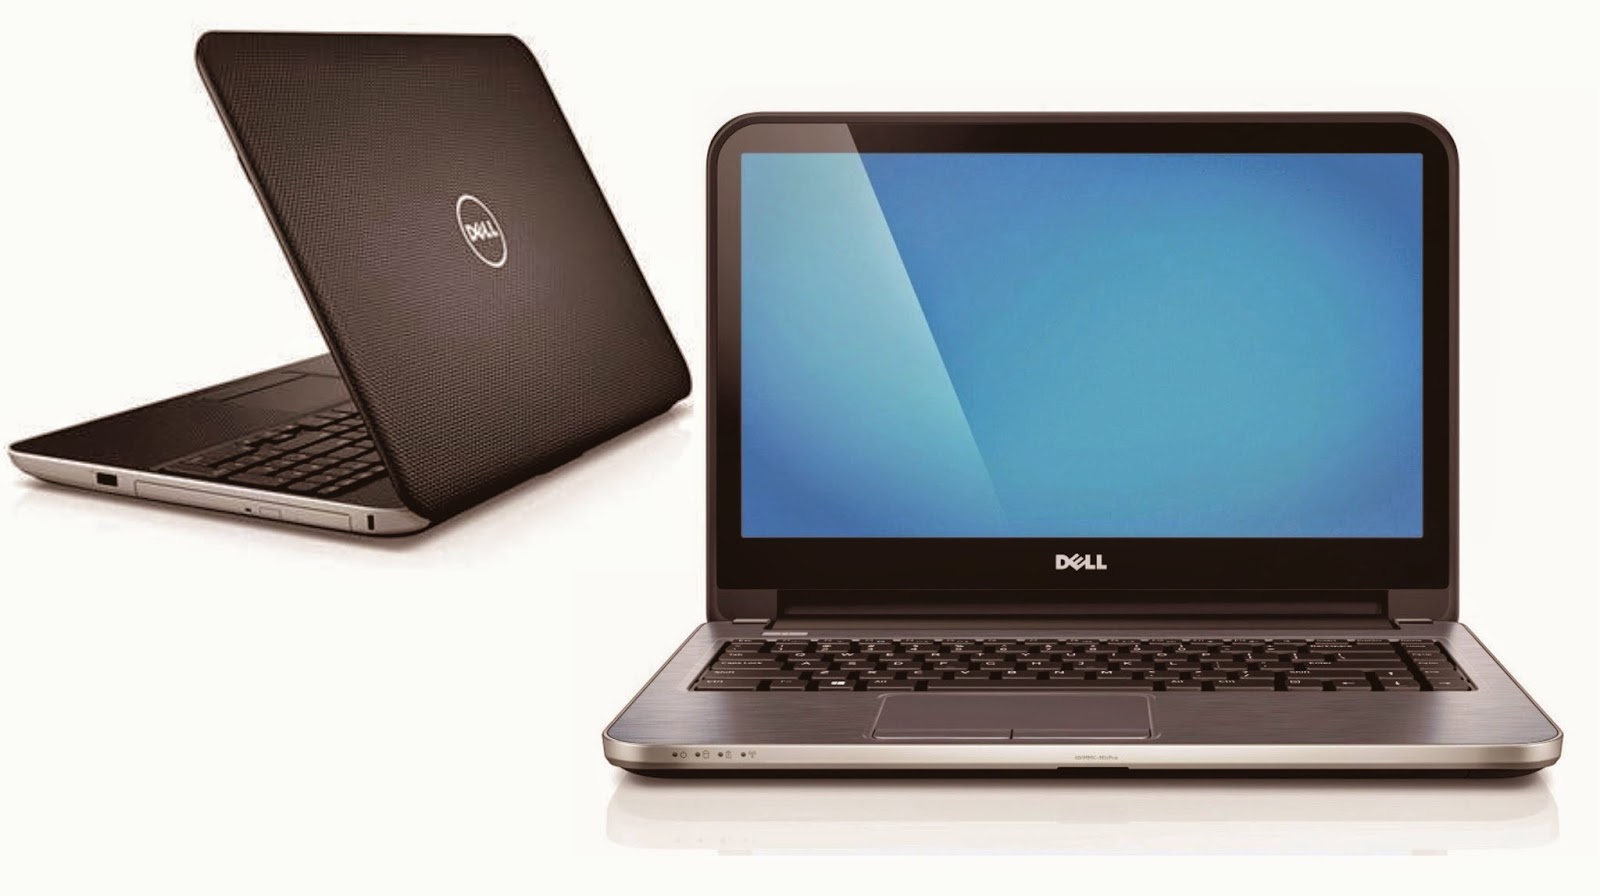 Dell Pp21l Drivers Free Download